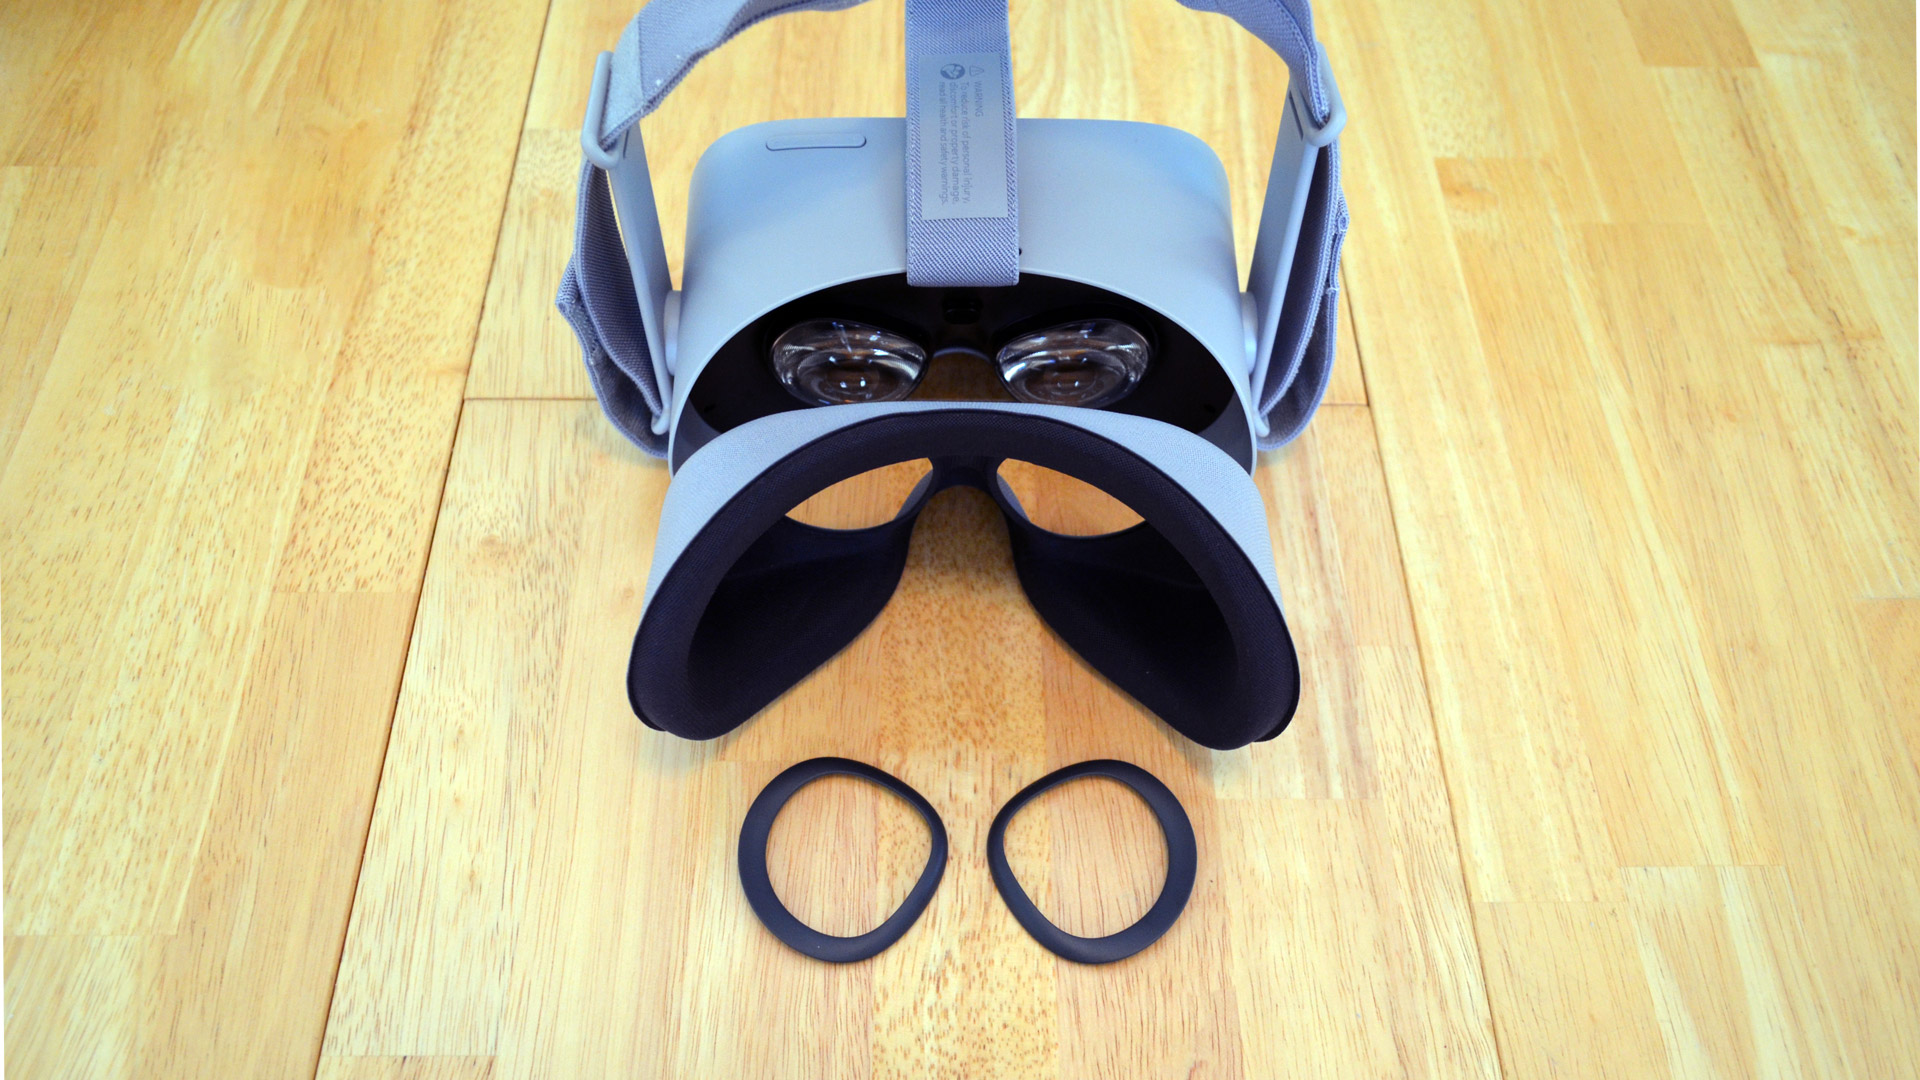 oculus quest 2 with glasses